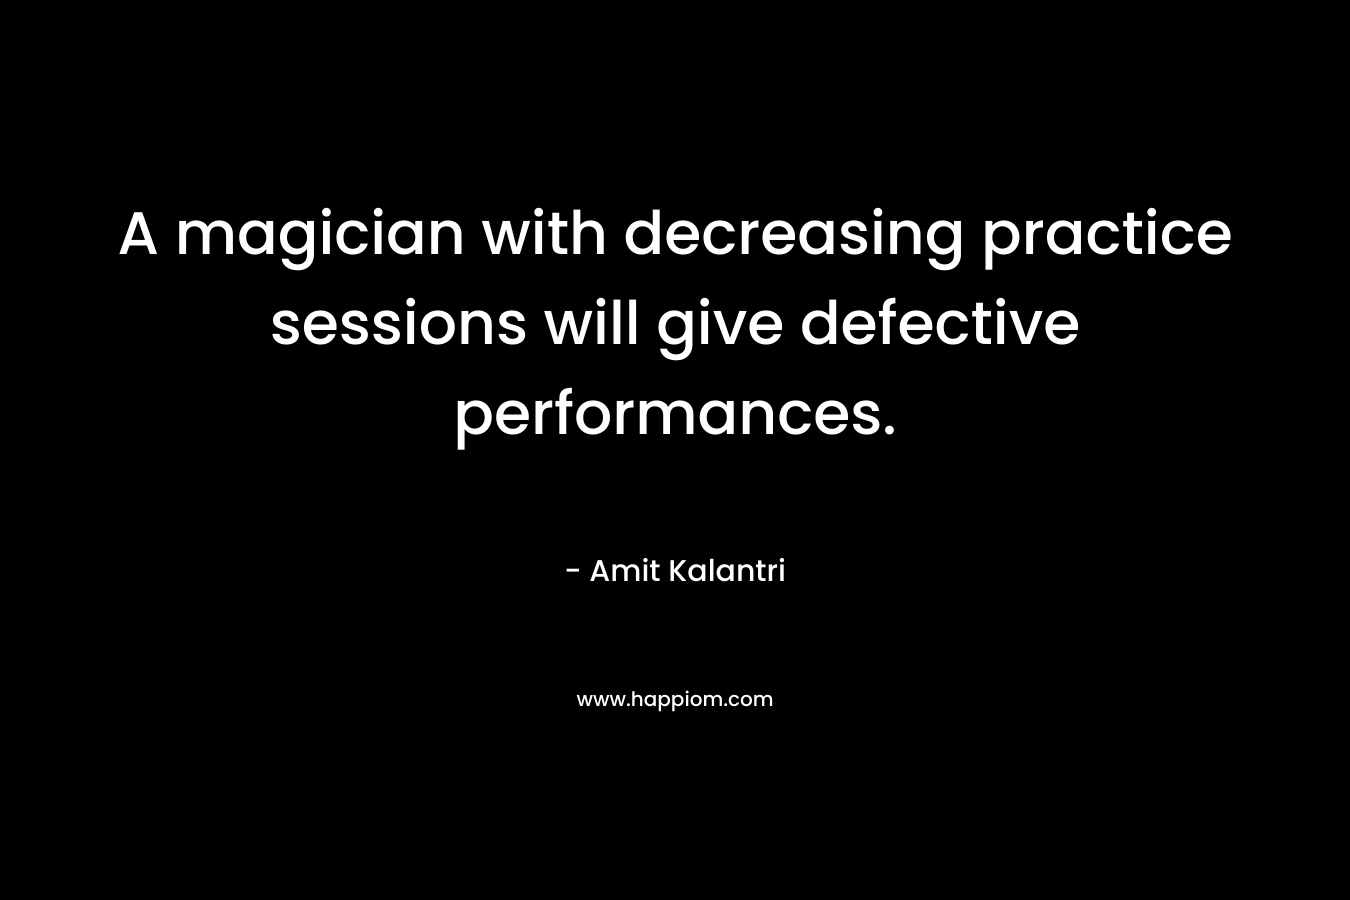 A magician with decreasing practice sessions will give defective performances.